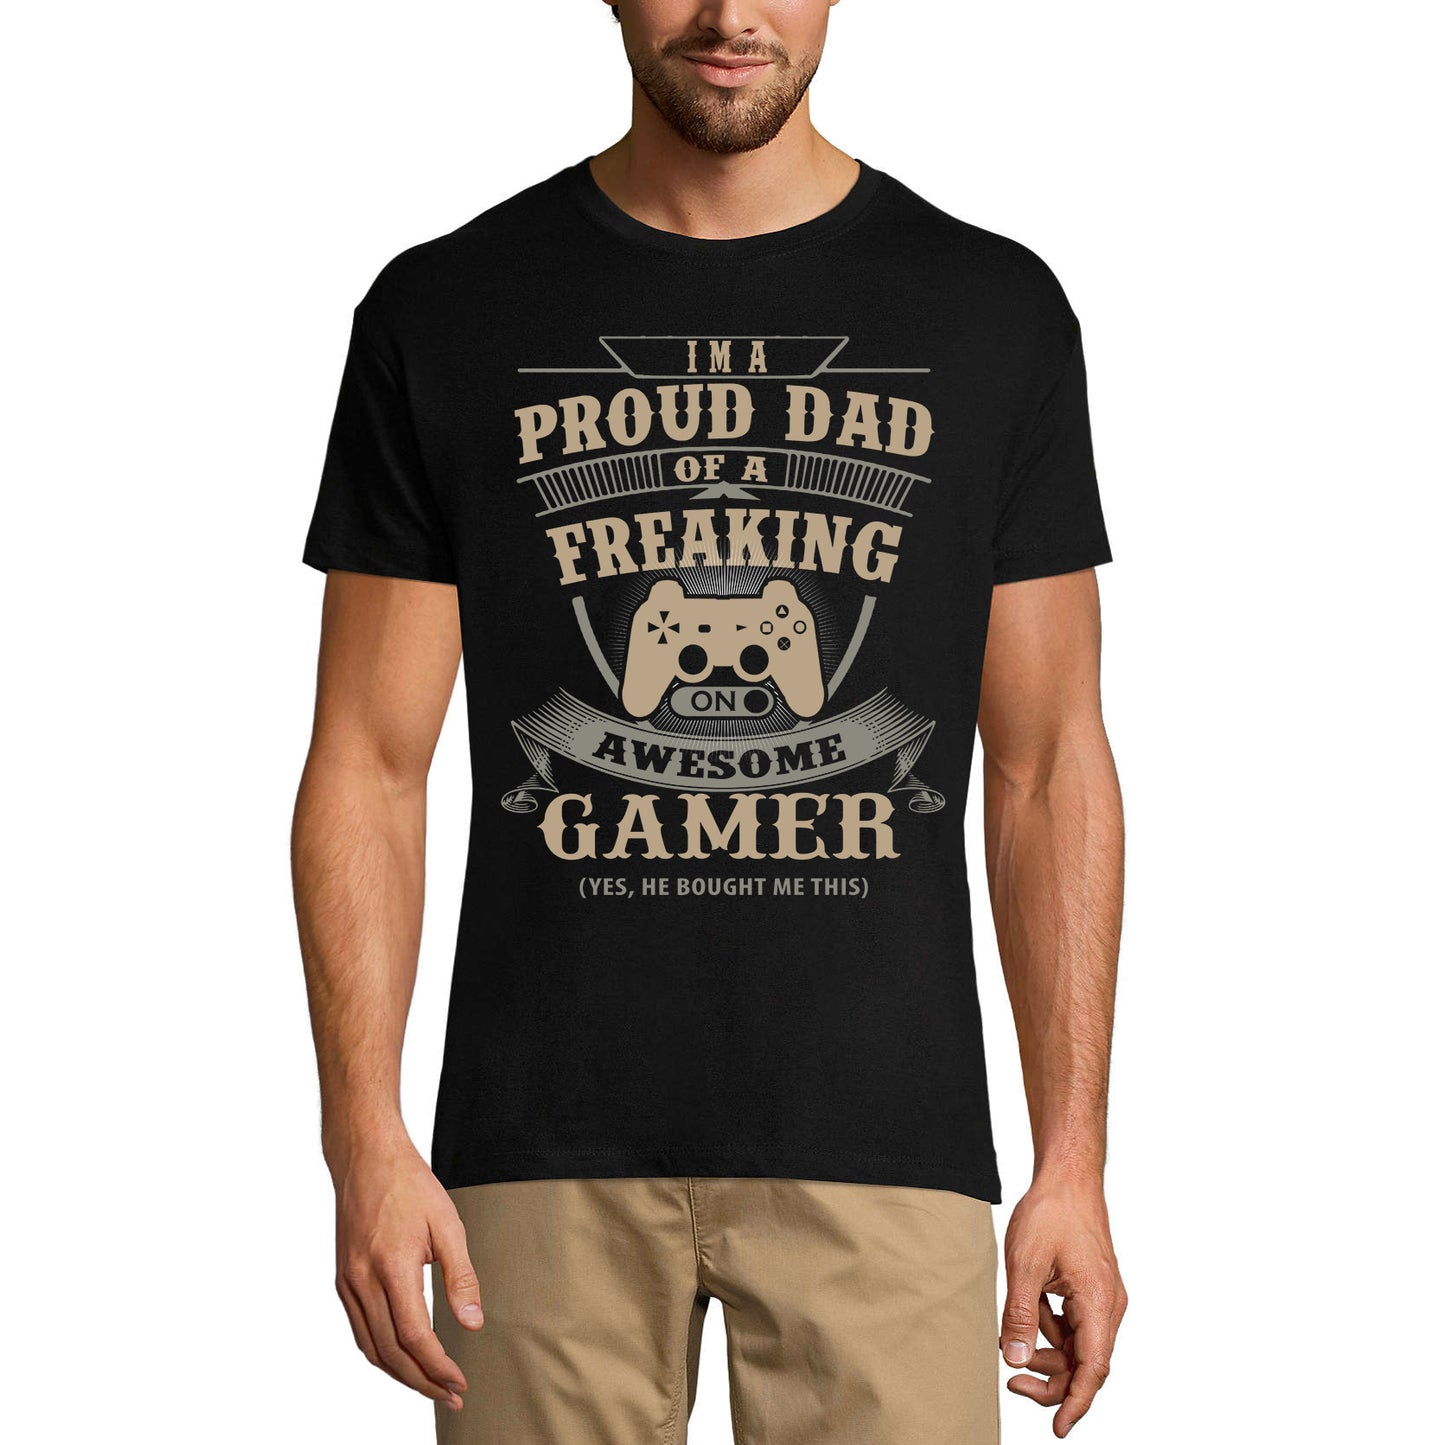 ULTRABASIC Men's T-Shirt I'm Proud Dad Awesome Gamer - Gift for Fathers - Gaming proud dad awesome gamer i paused my game alien player ufo playstation tee shirt clothes gaming apparel gifts super mario nintendo call of duty bros graphic tshirt video game funny geek gift for the gamer fortnite pubg humor son father birthday